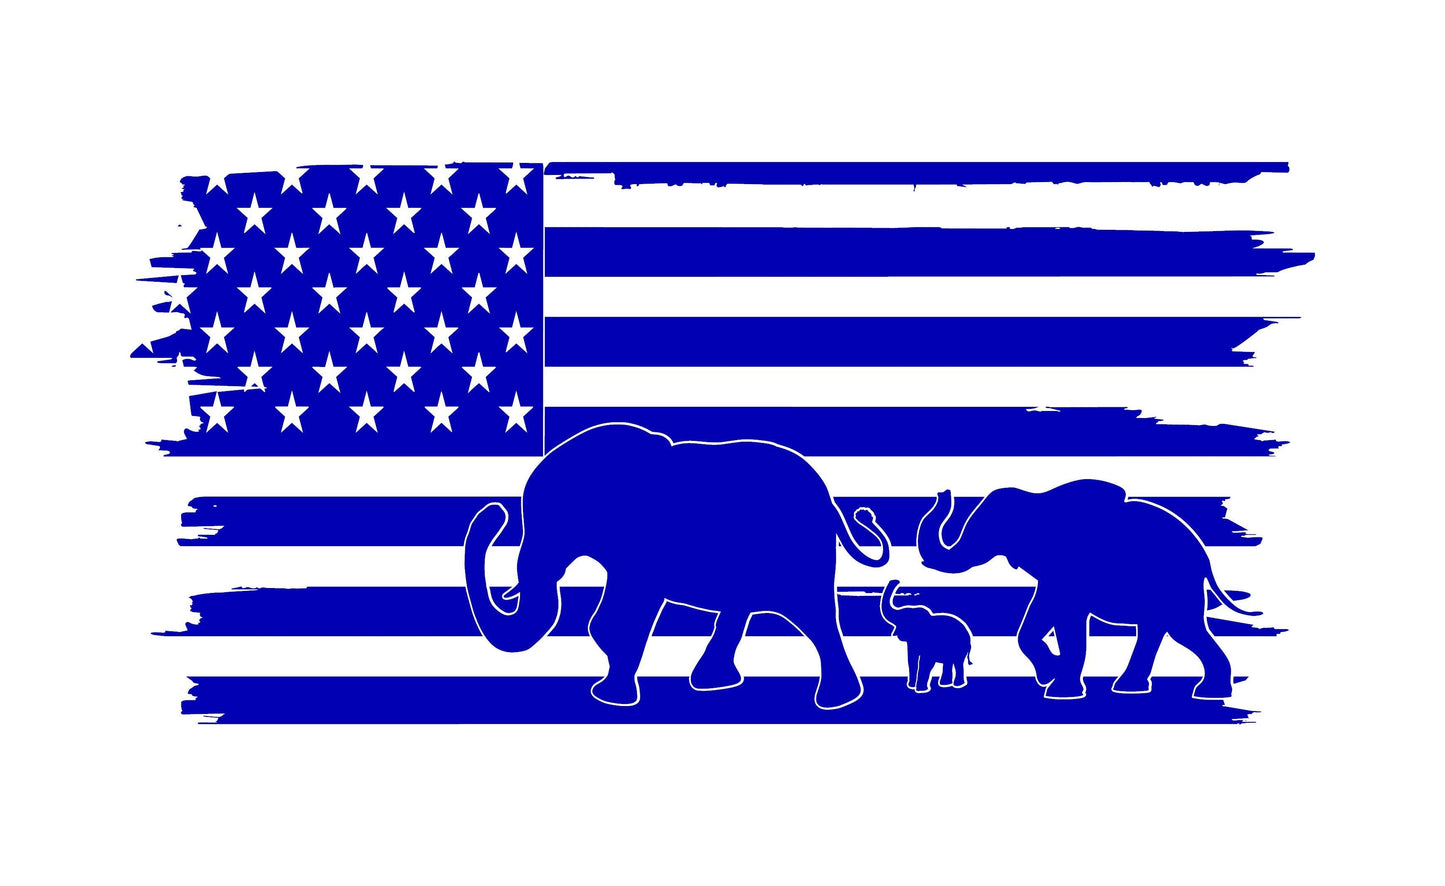 DISTRESSED AMERICAN FLAG | ELEPHANT FAMILY SILHOUETTE | REPUBLICAN 